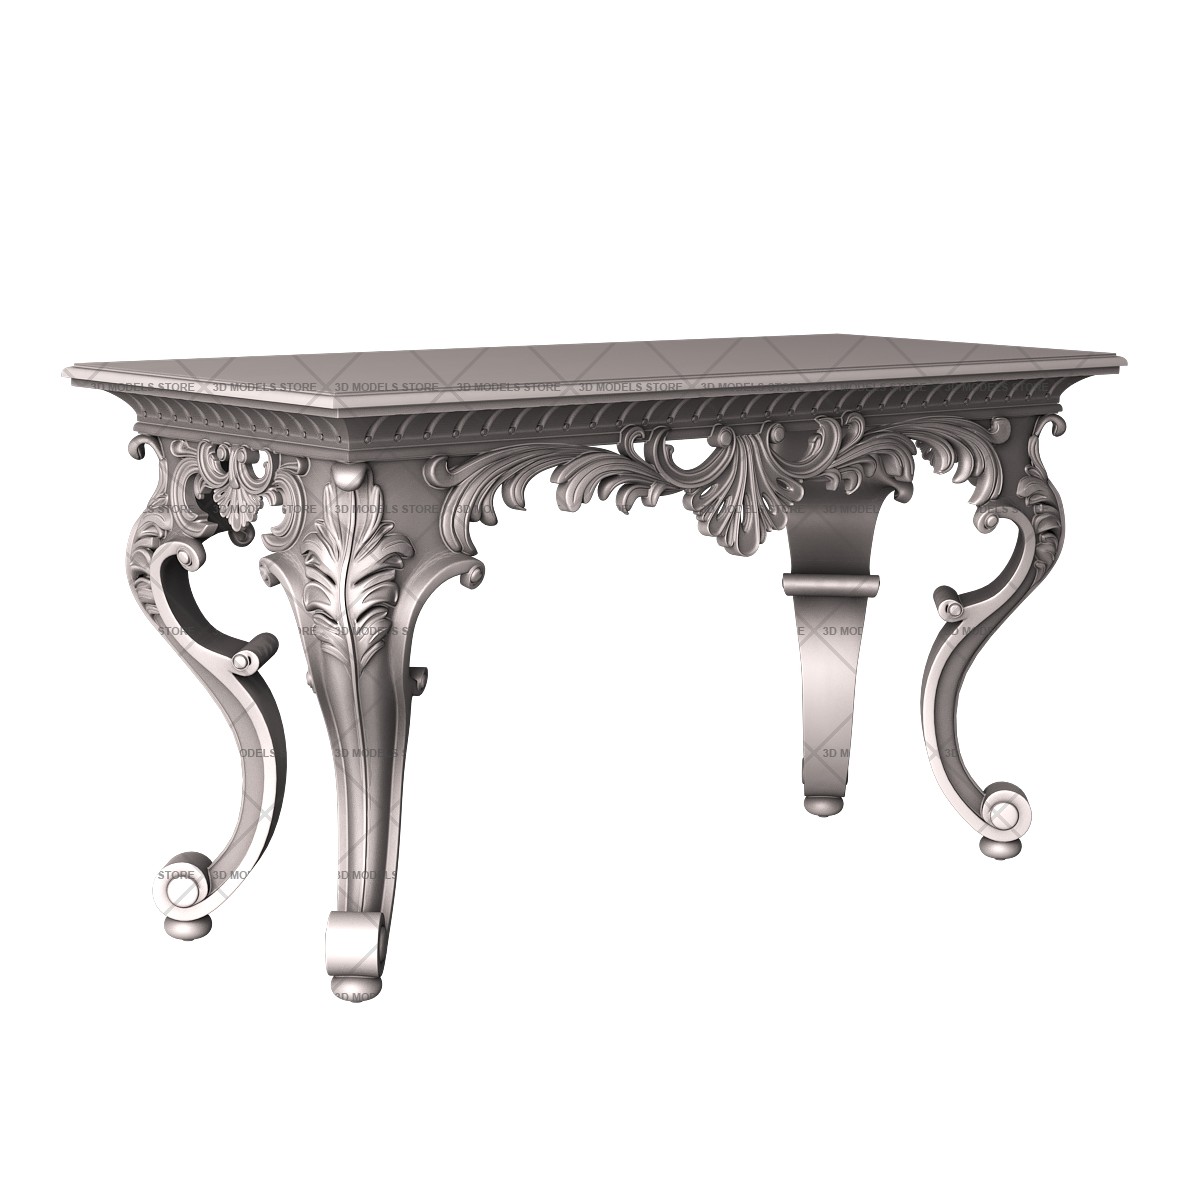 Table with curved legs, 3d models (stl)